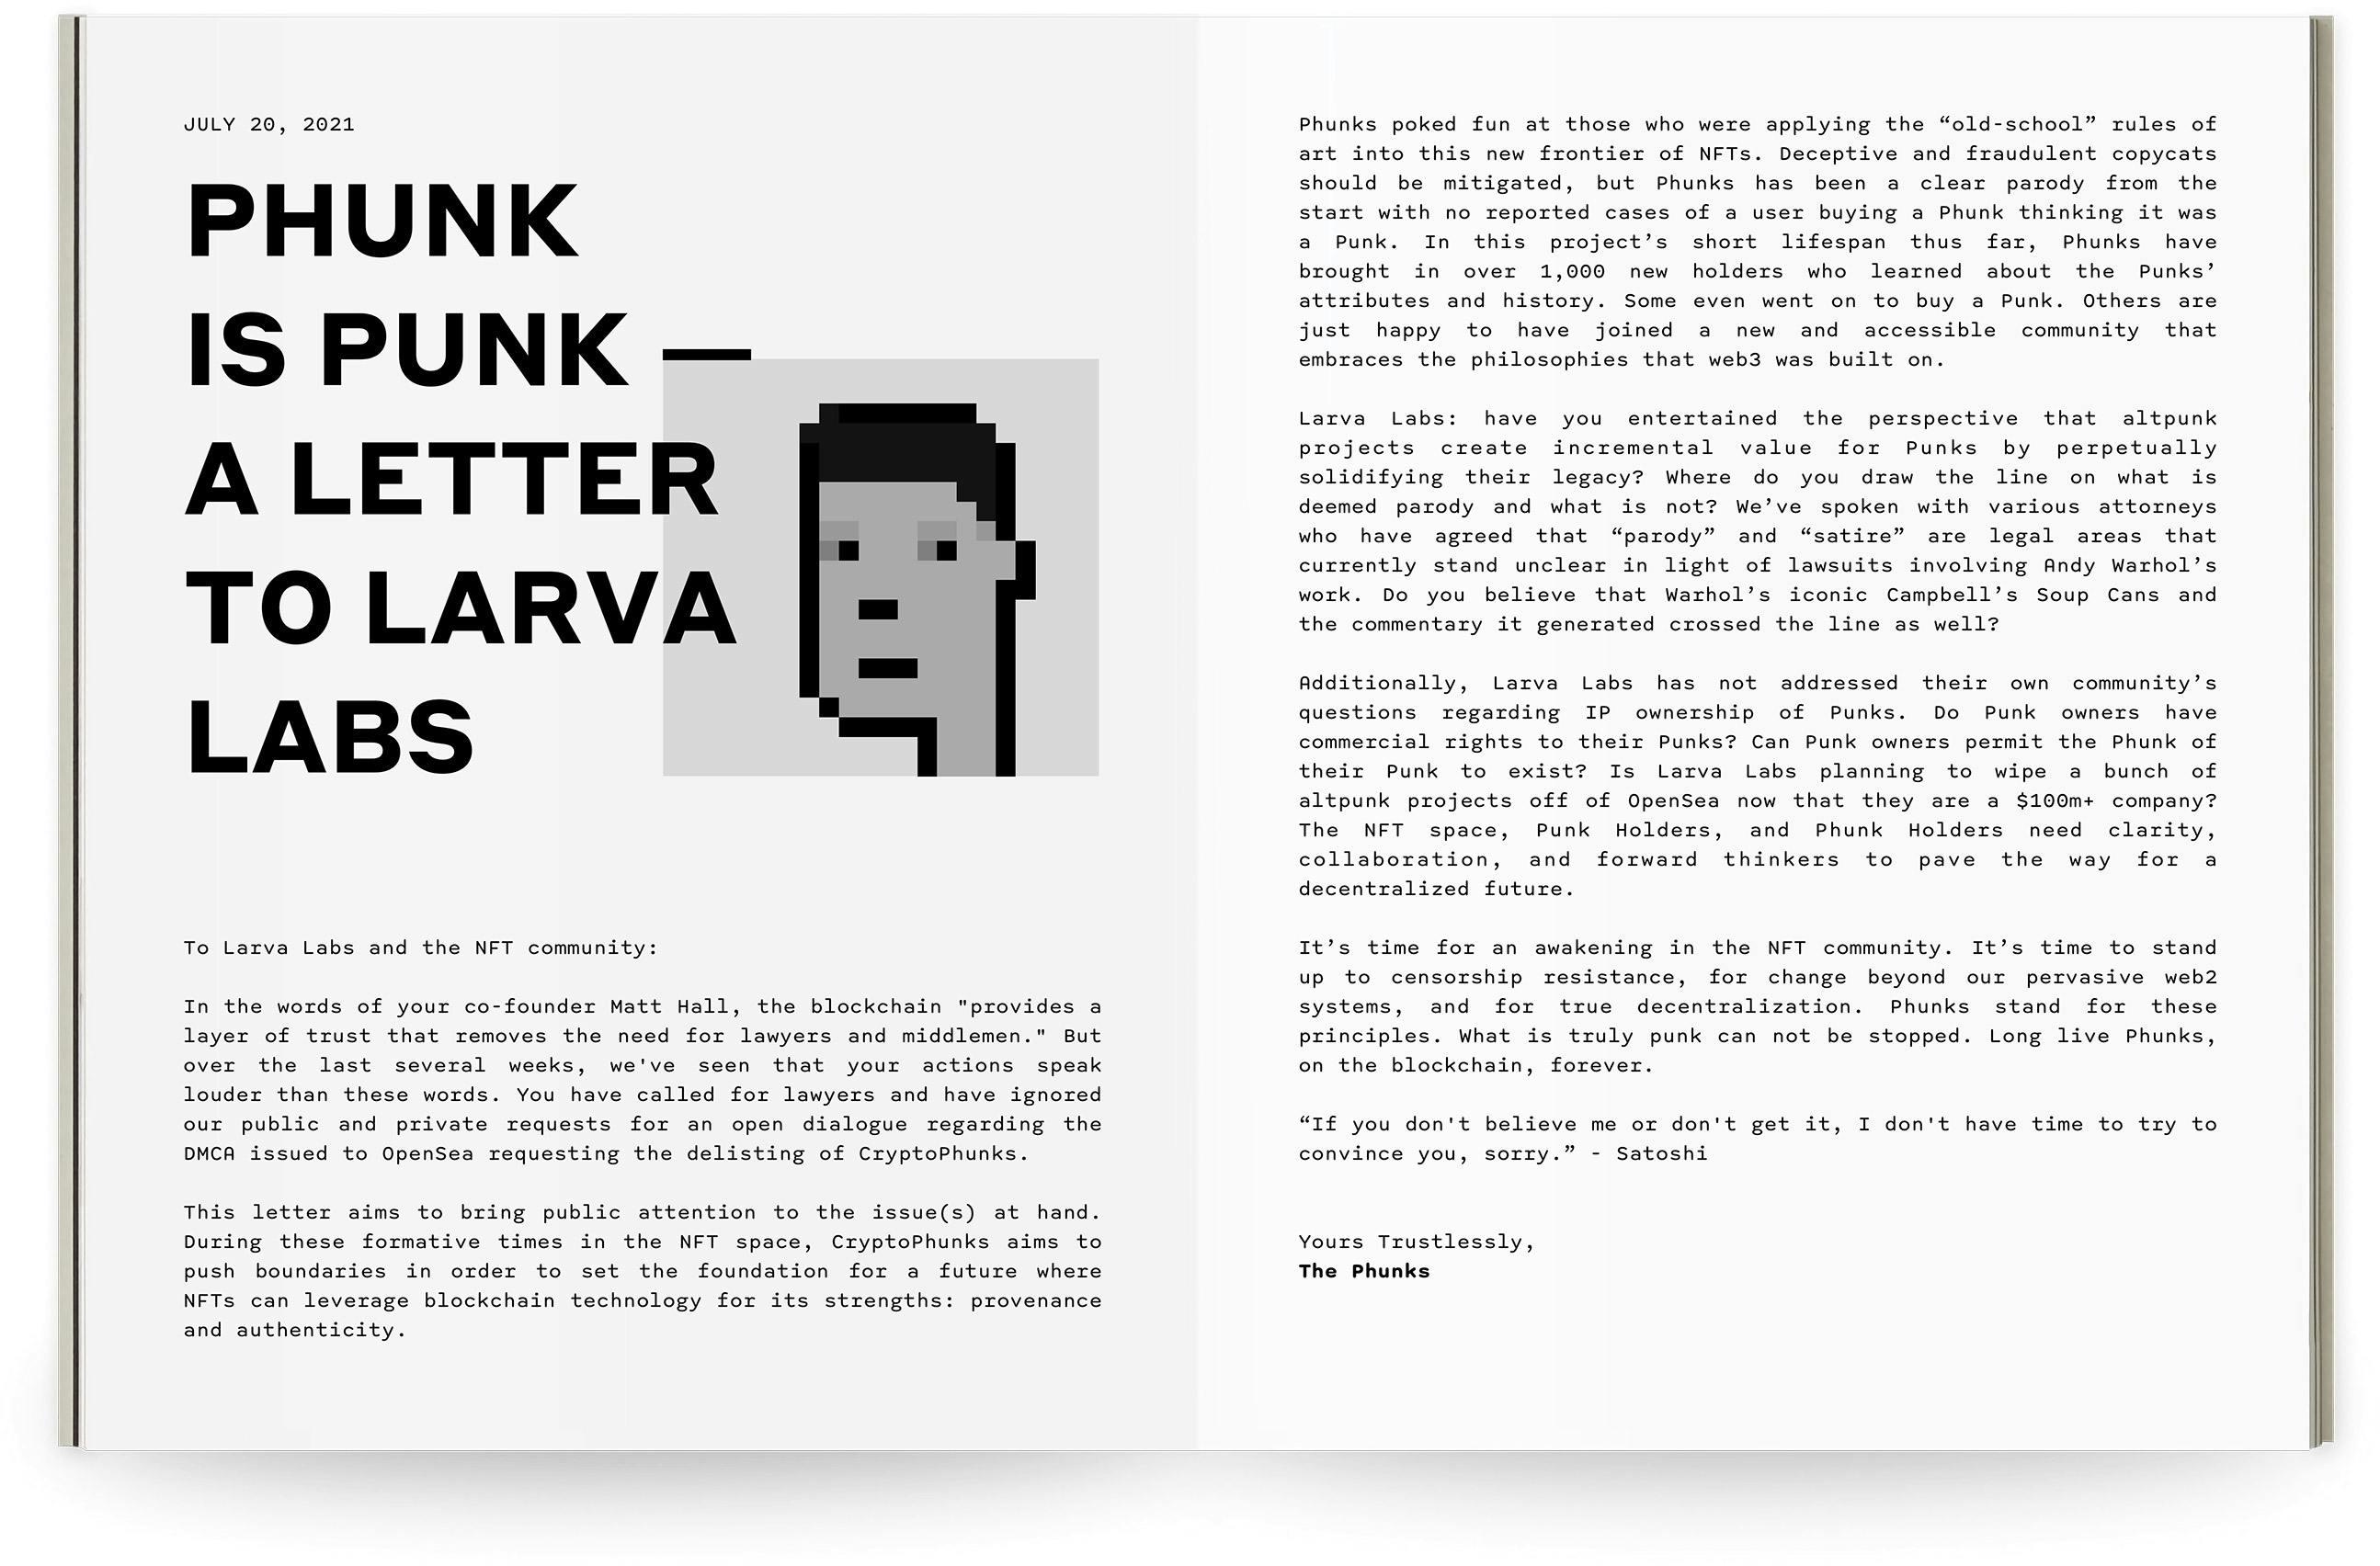 Phunk is Punk - A Letter To Larva Labs written in collaboration with community members Strug and thedirtybutler, published on cryptophunks.com on July 20, 2021. 